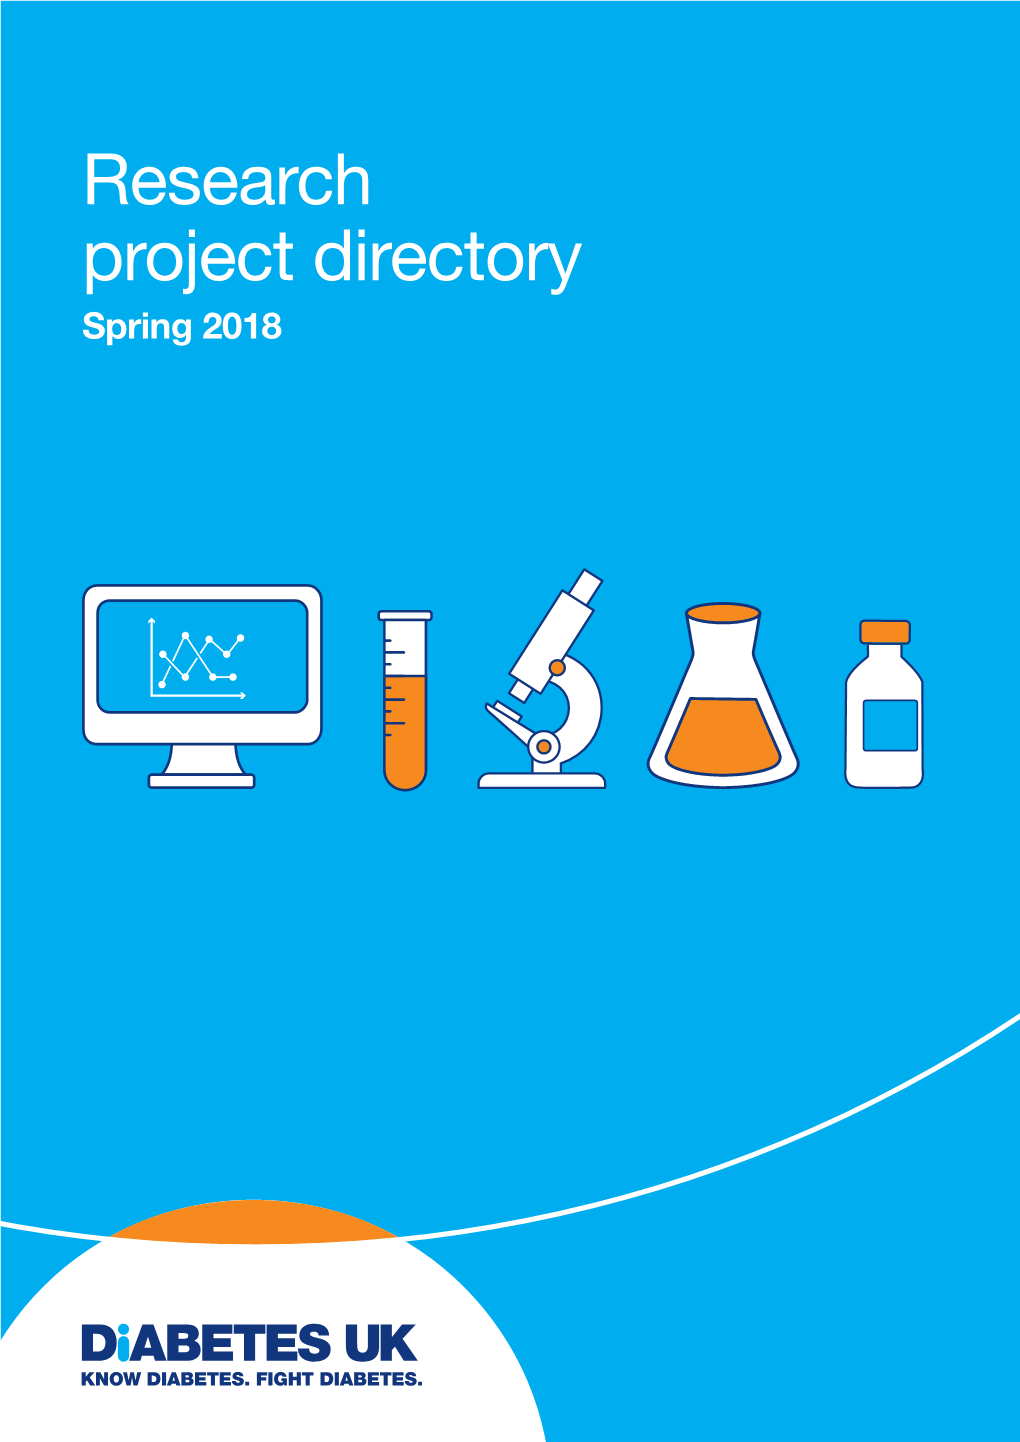 Research Project Directory Spring 2018